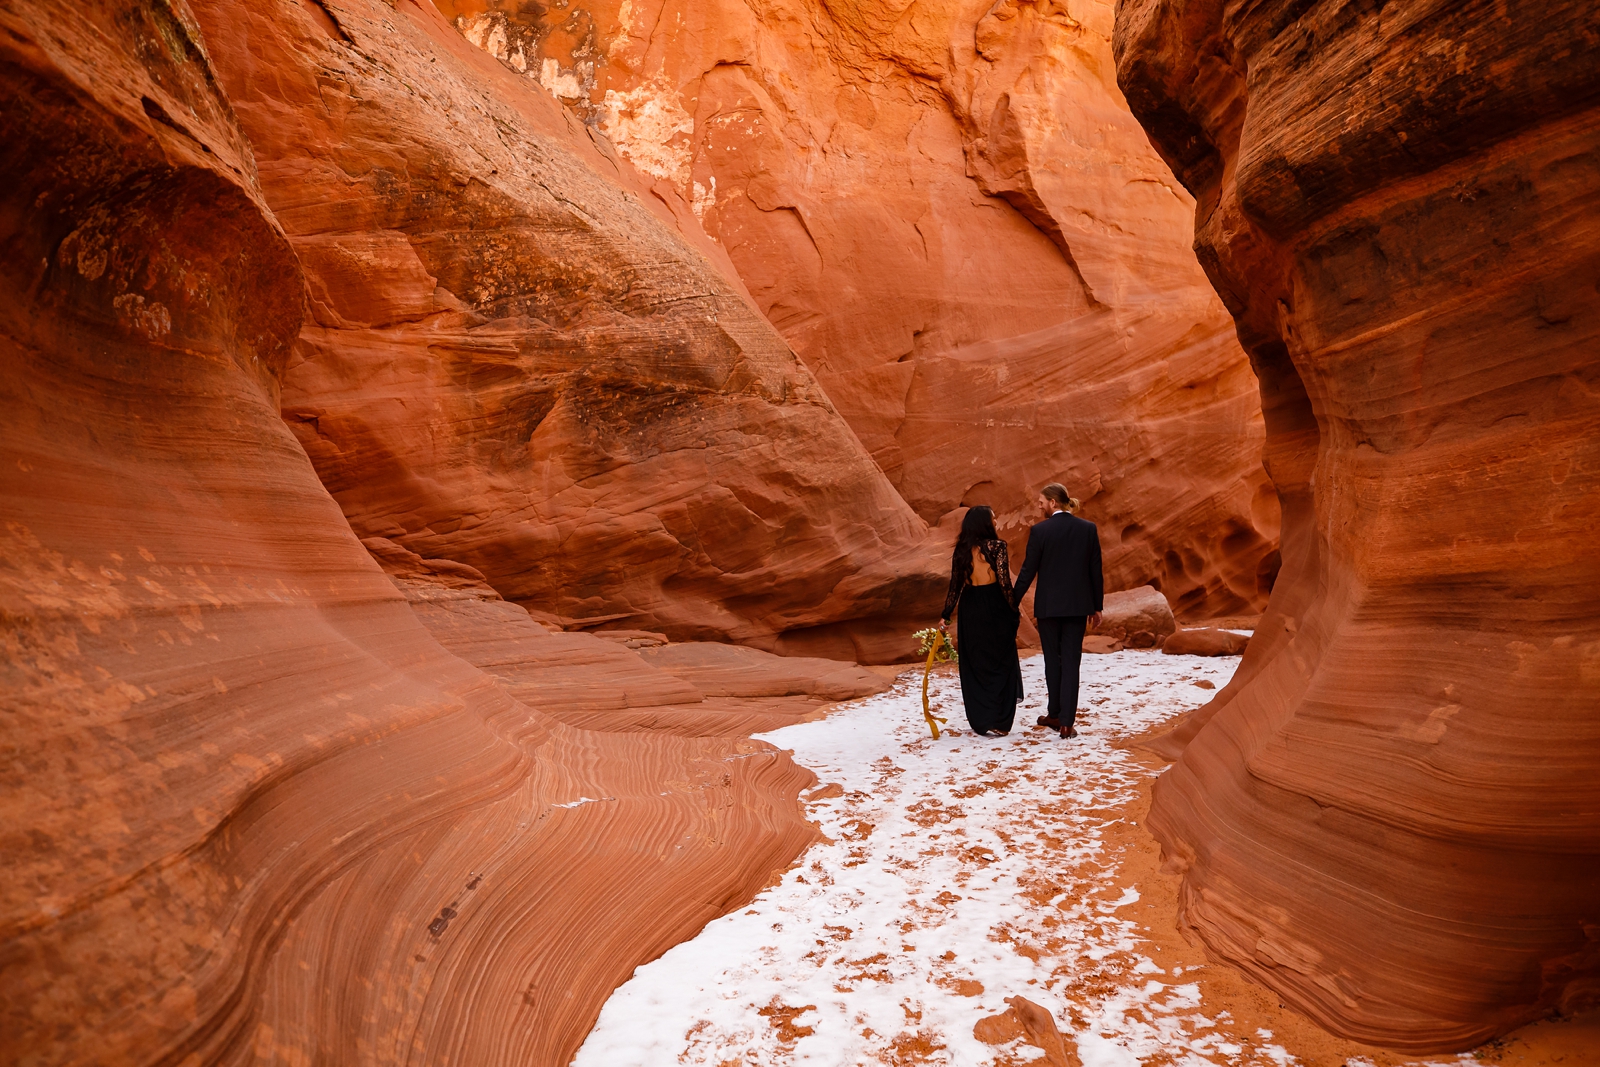 This couple is walking through a snowy slot canyon on their anniversary.